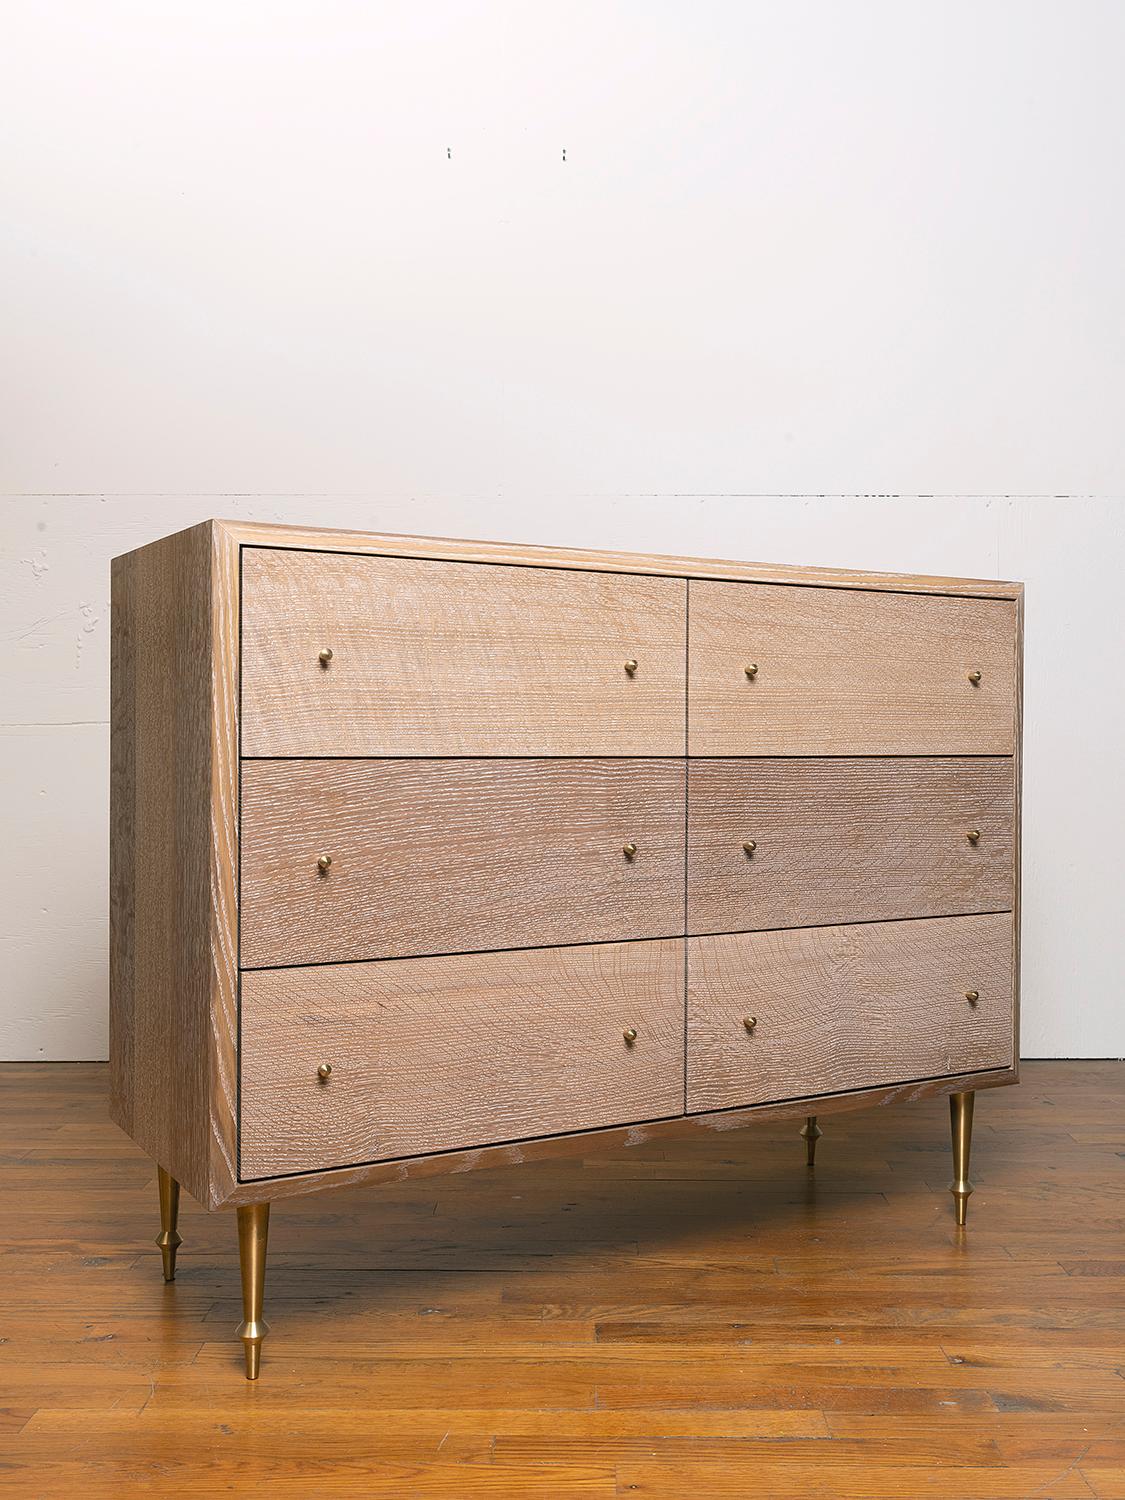 Solid white oak with turned brass legs and drawer pulls.
Cerused finish.
Dimensions: 46” W x 18” D x 36” H.
 